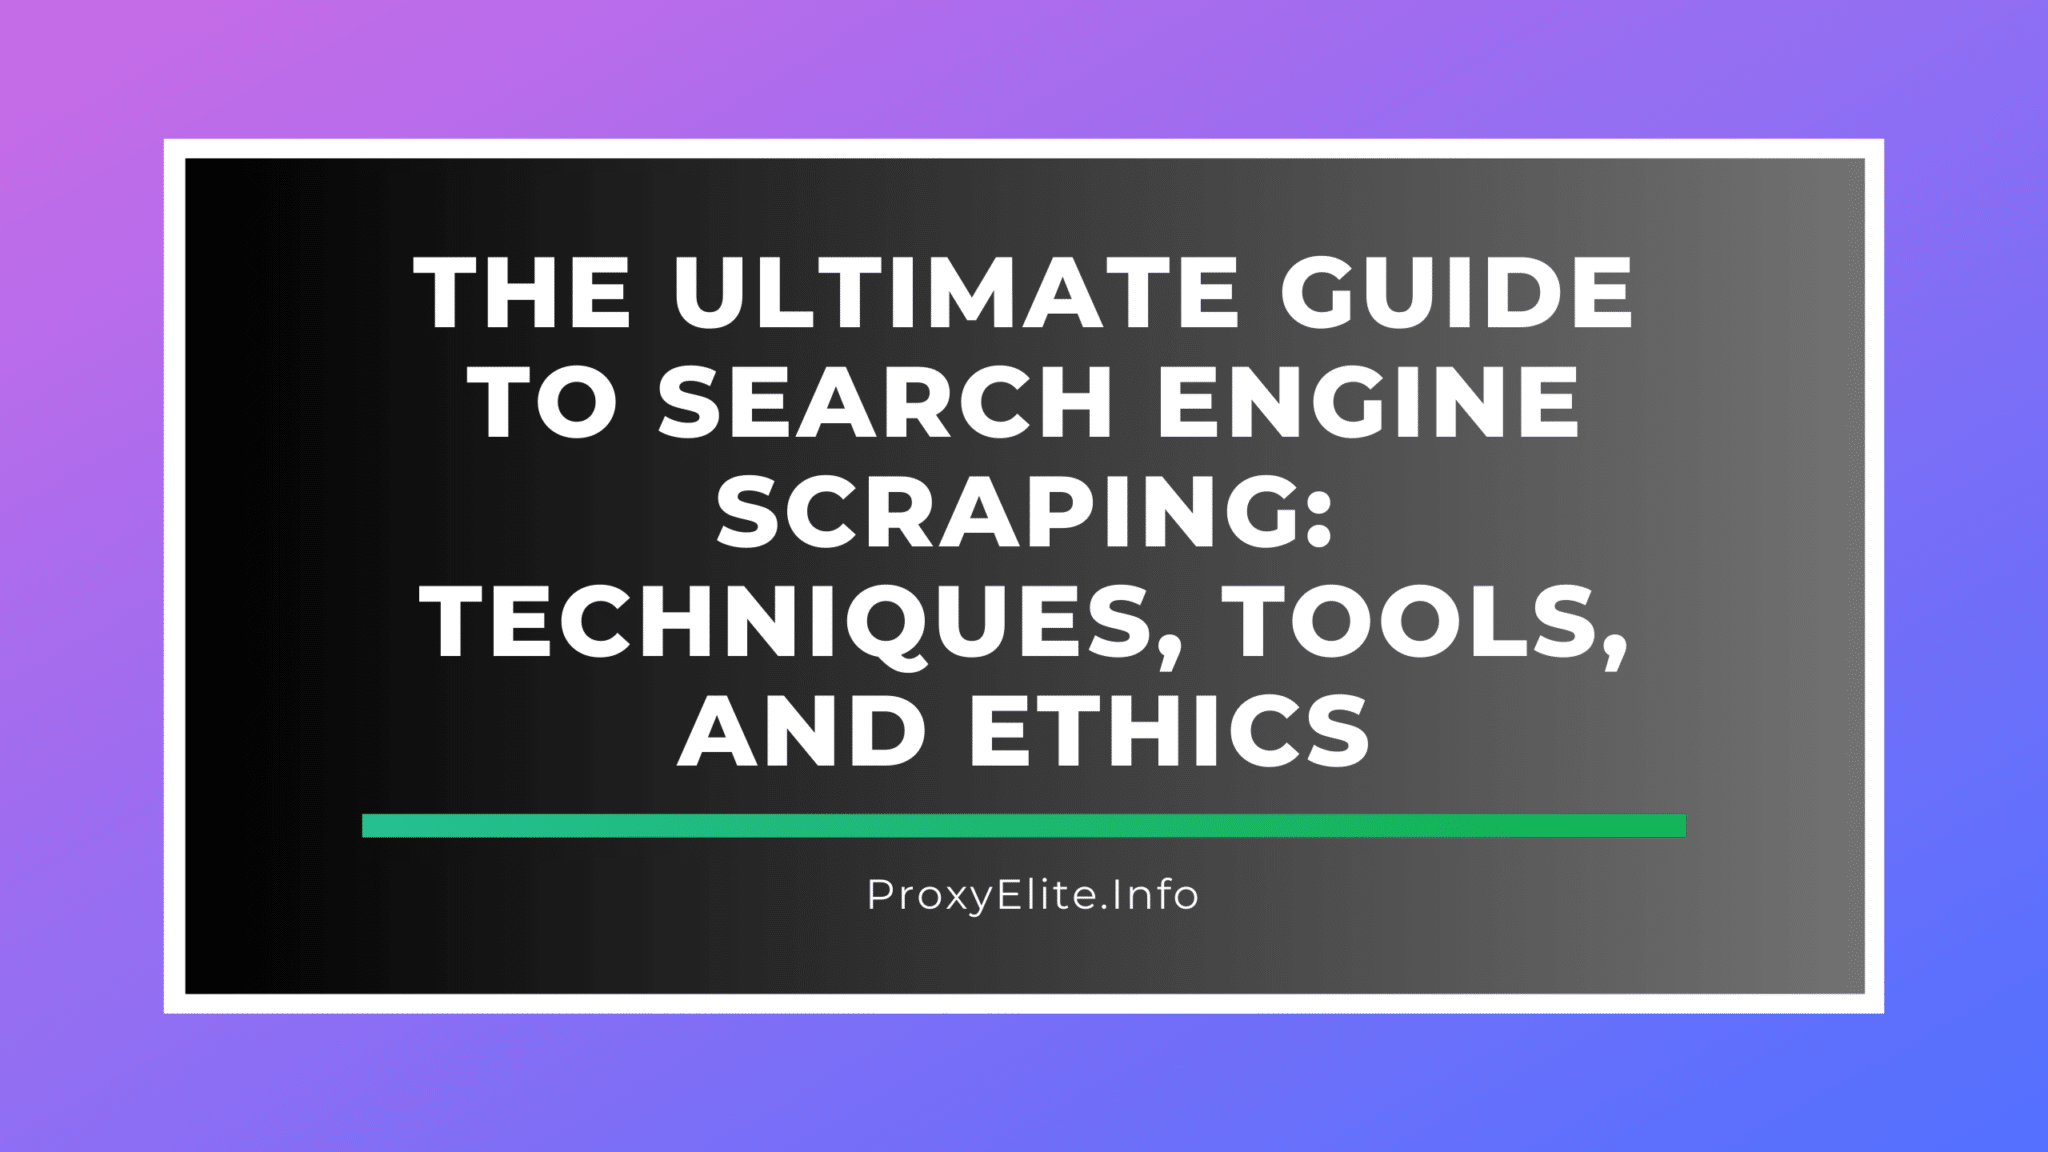 The Ultimate Guide to Search Engine Scraping: Techniques, Tools, and Ethics